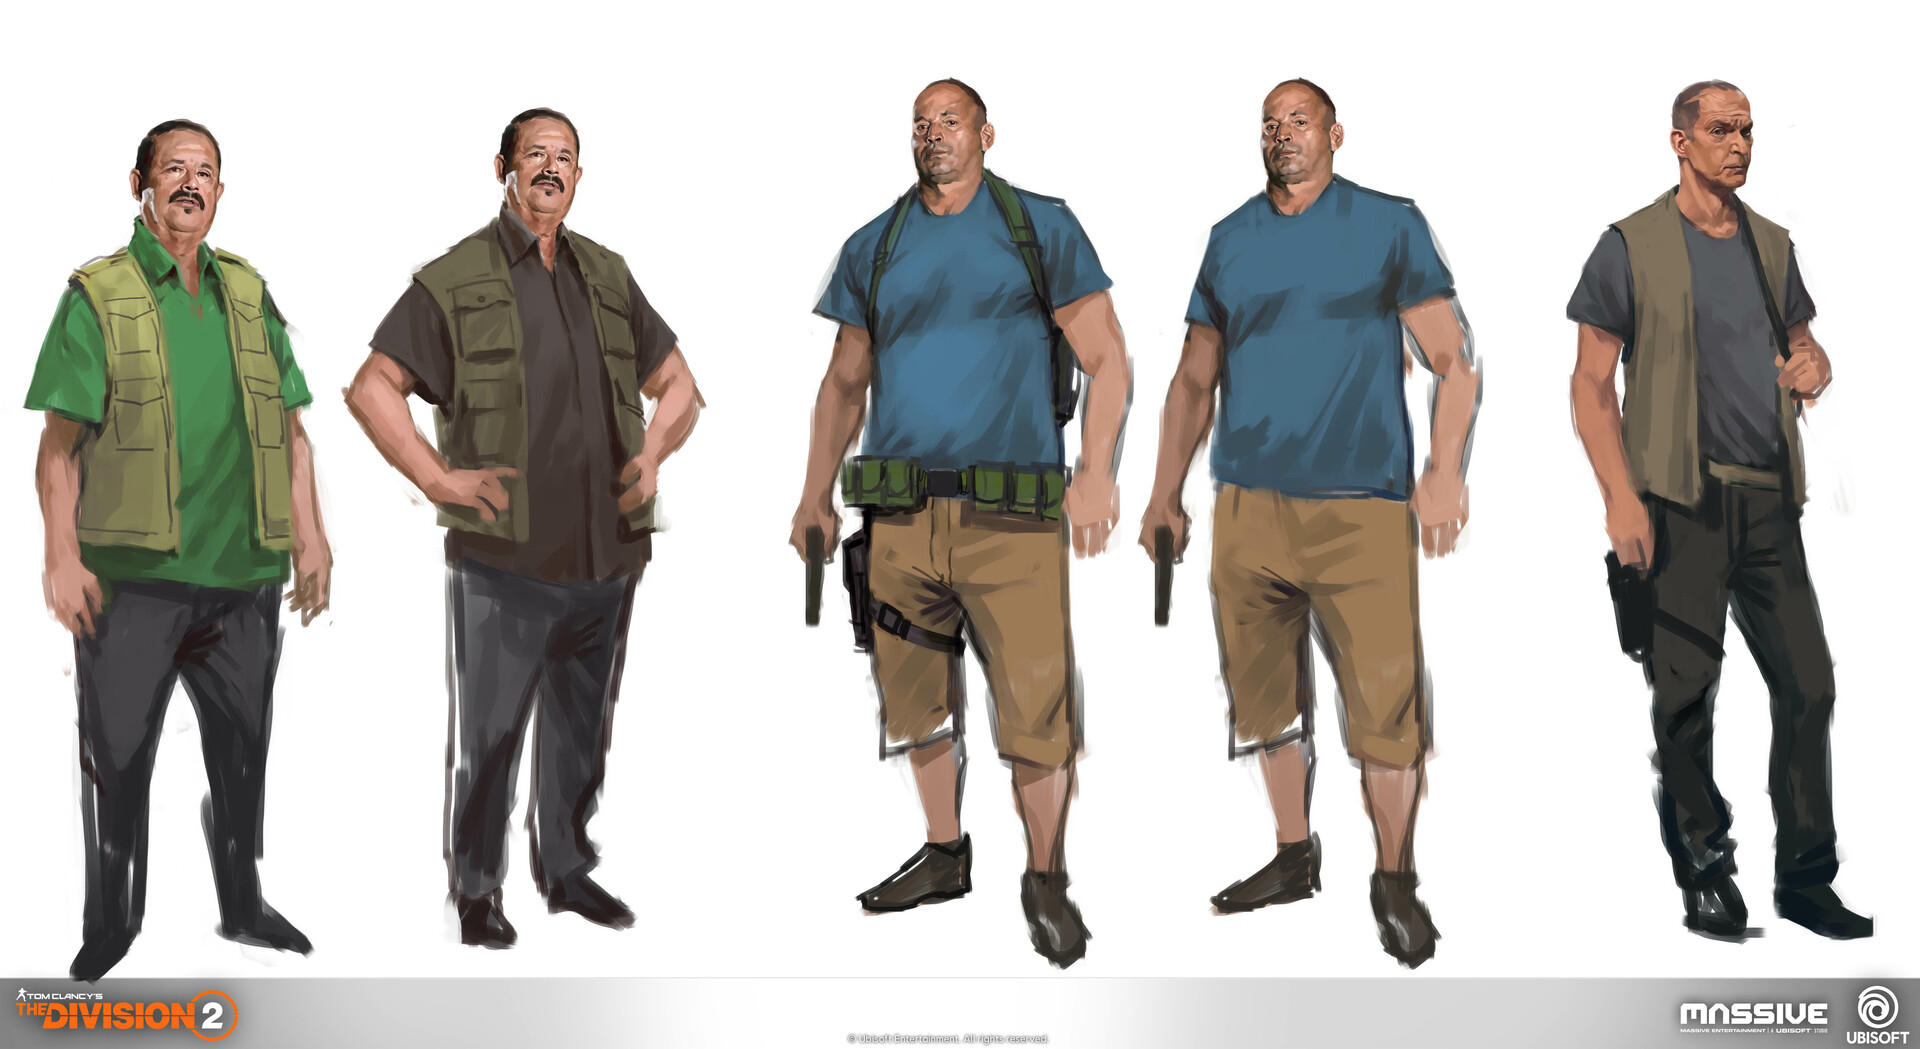 Miguel Iglesias - The division2- Character Concept art